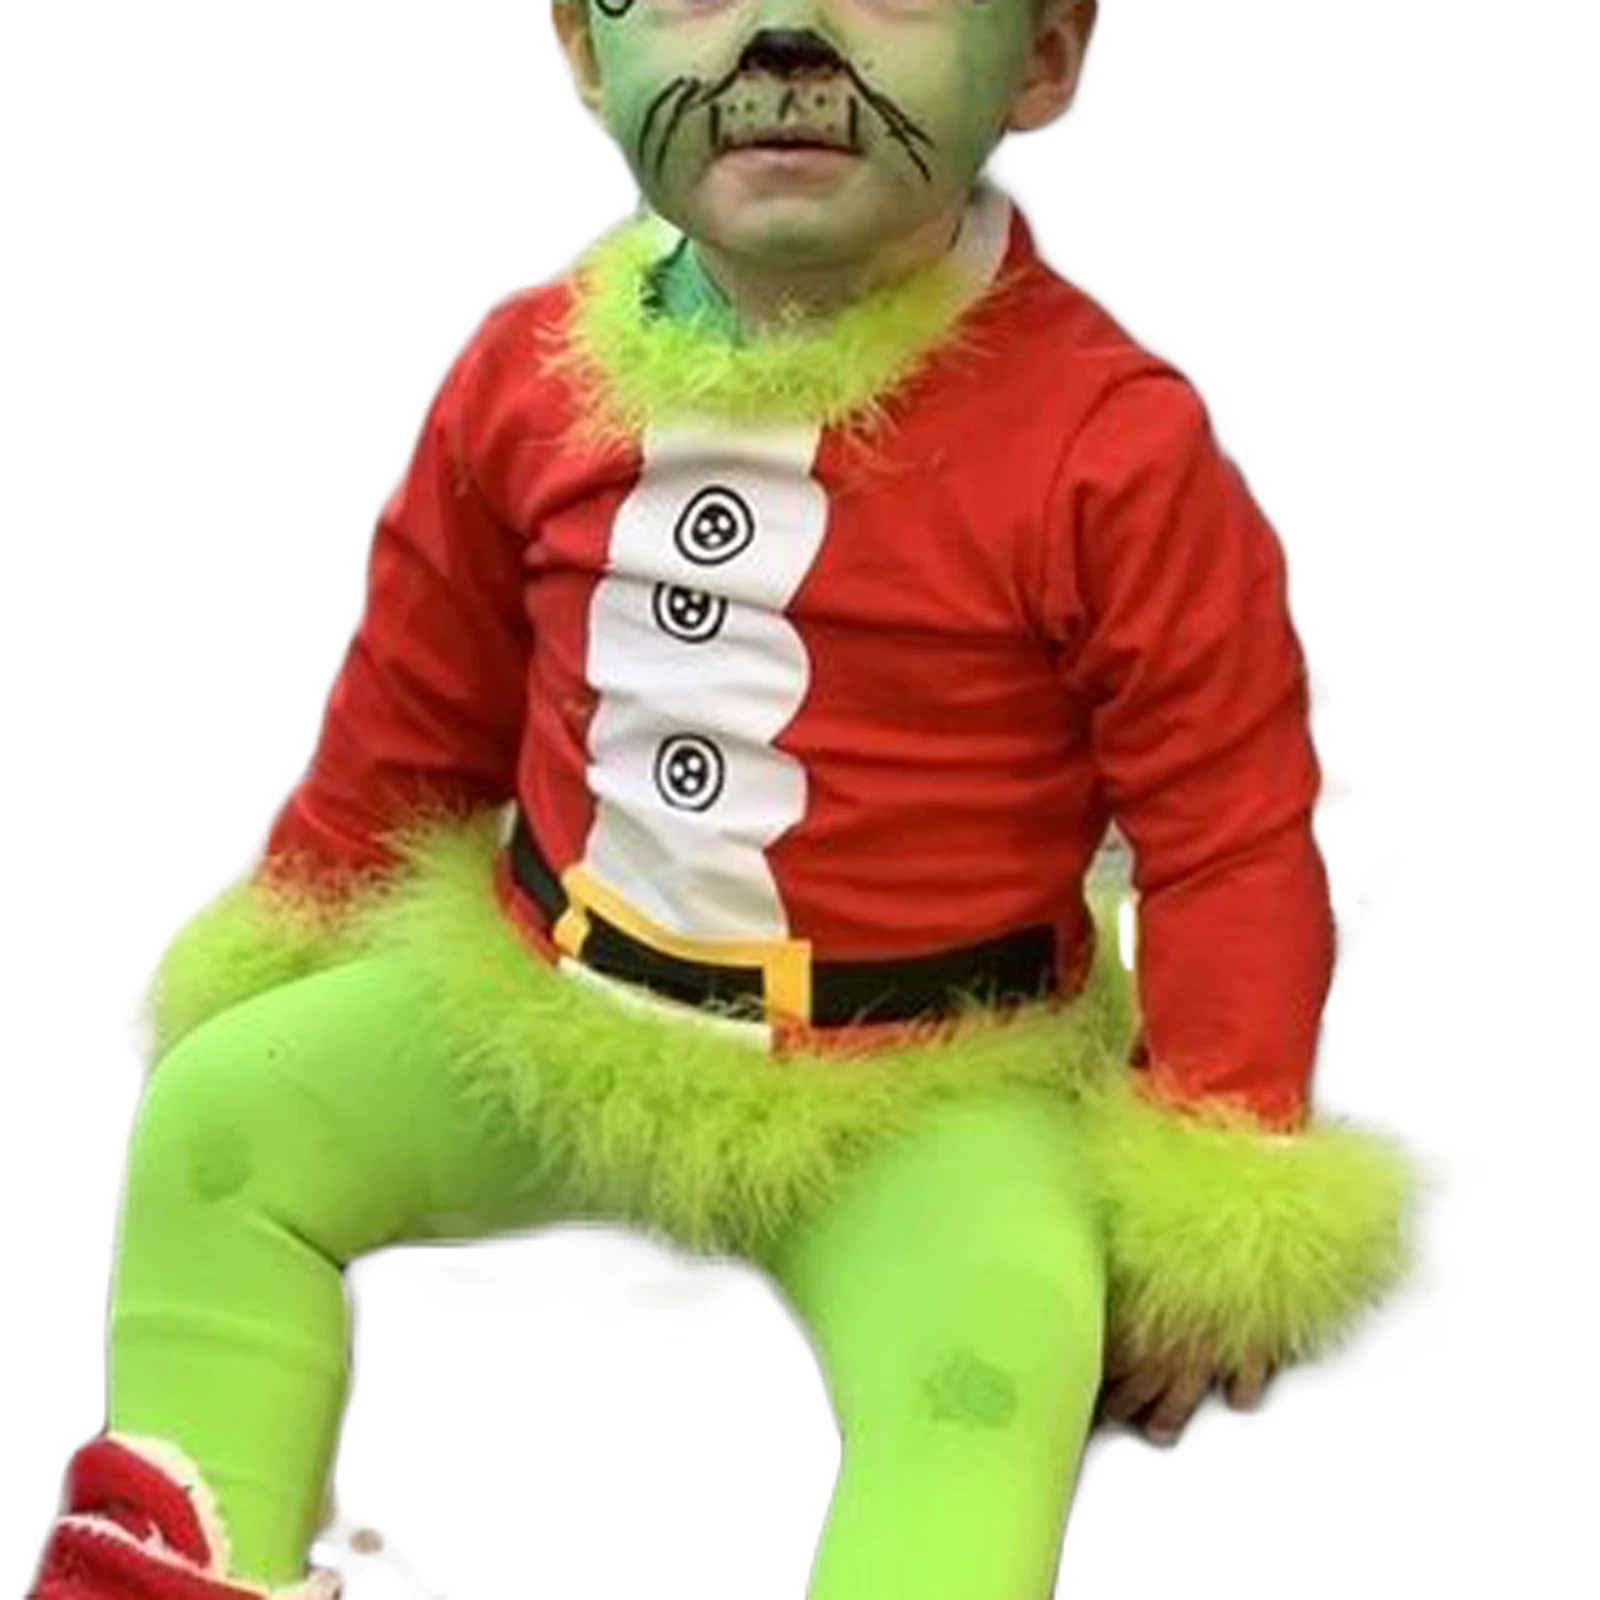 2Pcs Toddler Baby Green Furry Grinch Outfits Long Sleeve Top+ Long Pants Santa Claus Clothes Xmas Party Dress Up Cosplay Costume beautyful kid suit